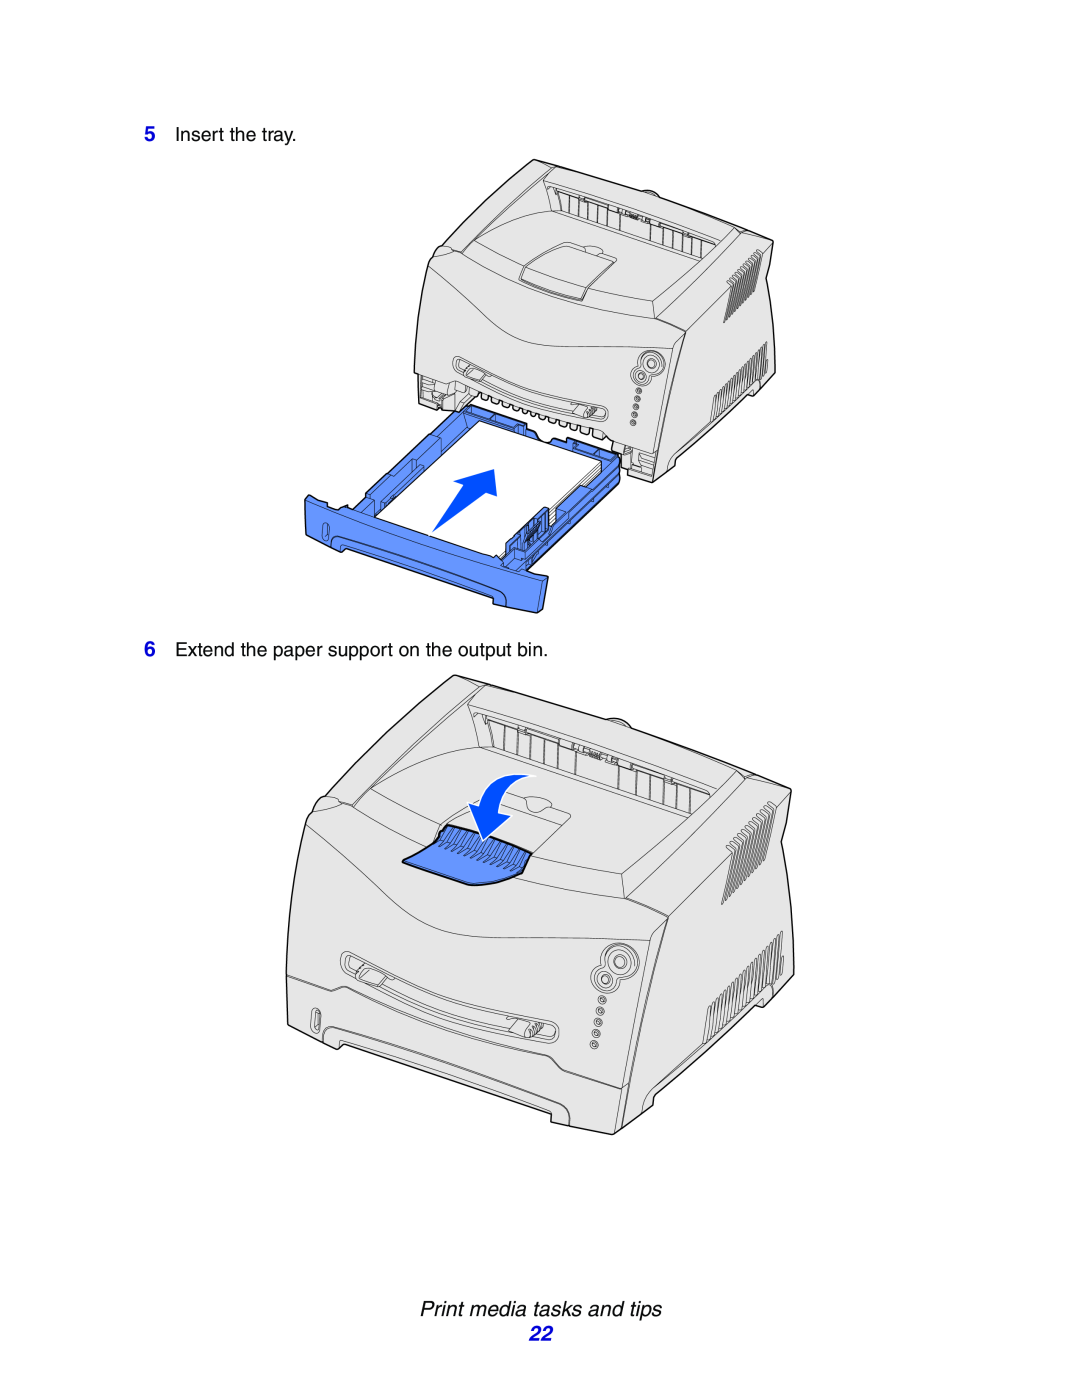 Lexmark E234N manual Print media tasks and tips, 5Insert the tray, 6Extend the paper support on the output bin 